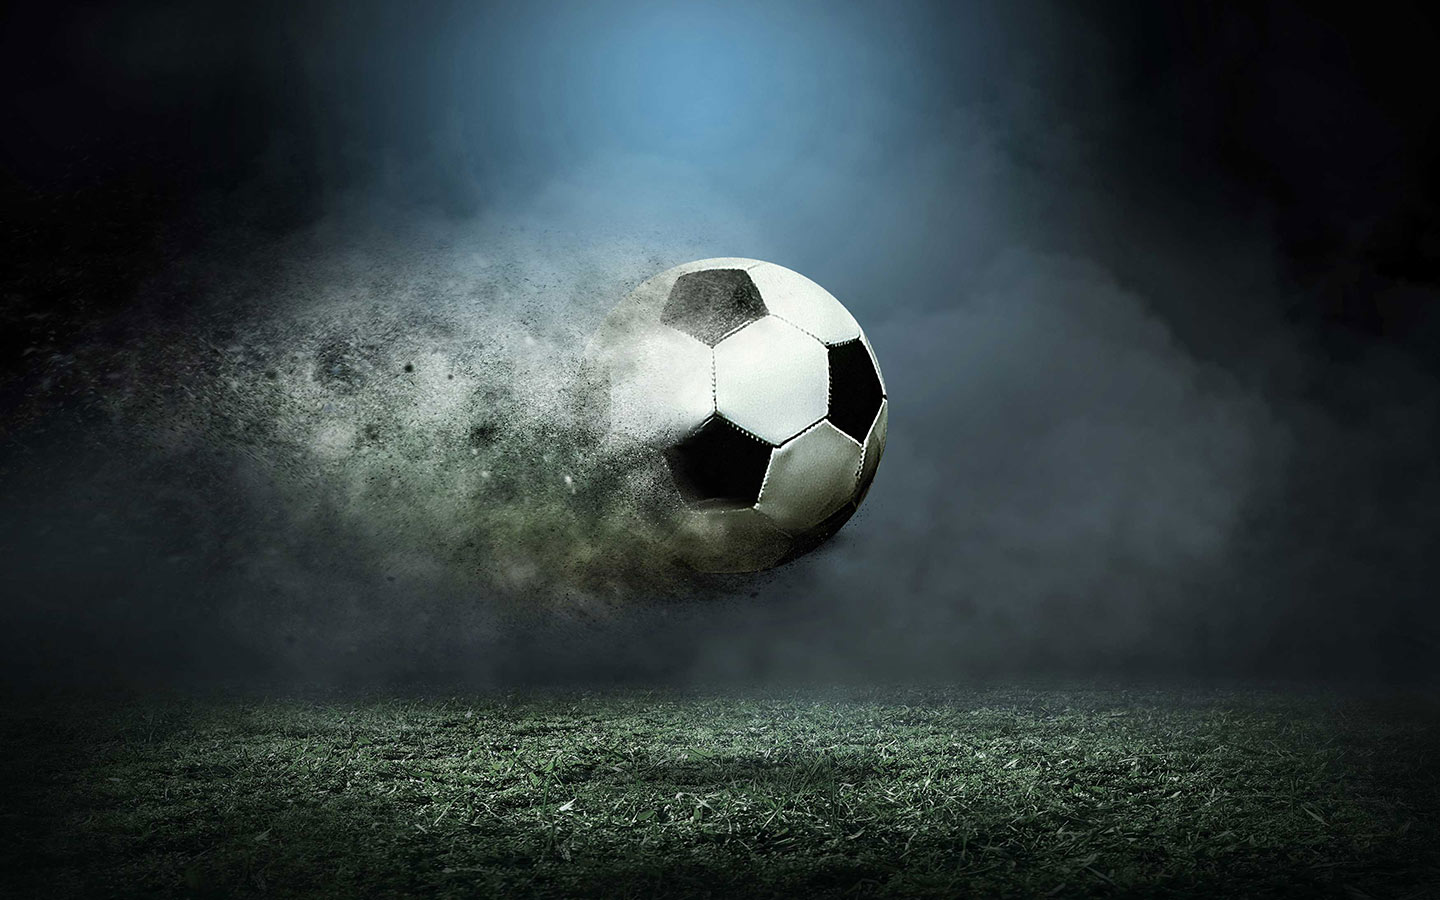 Soccer ball in motion over grassy area